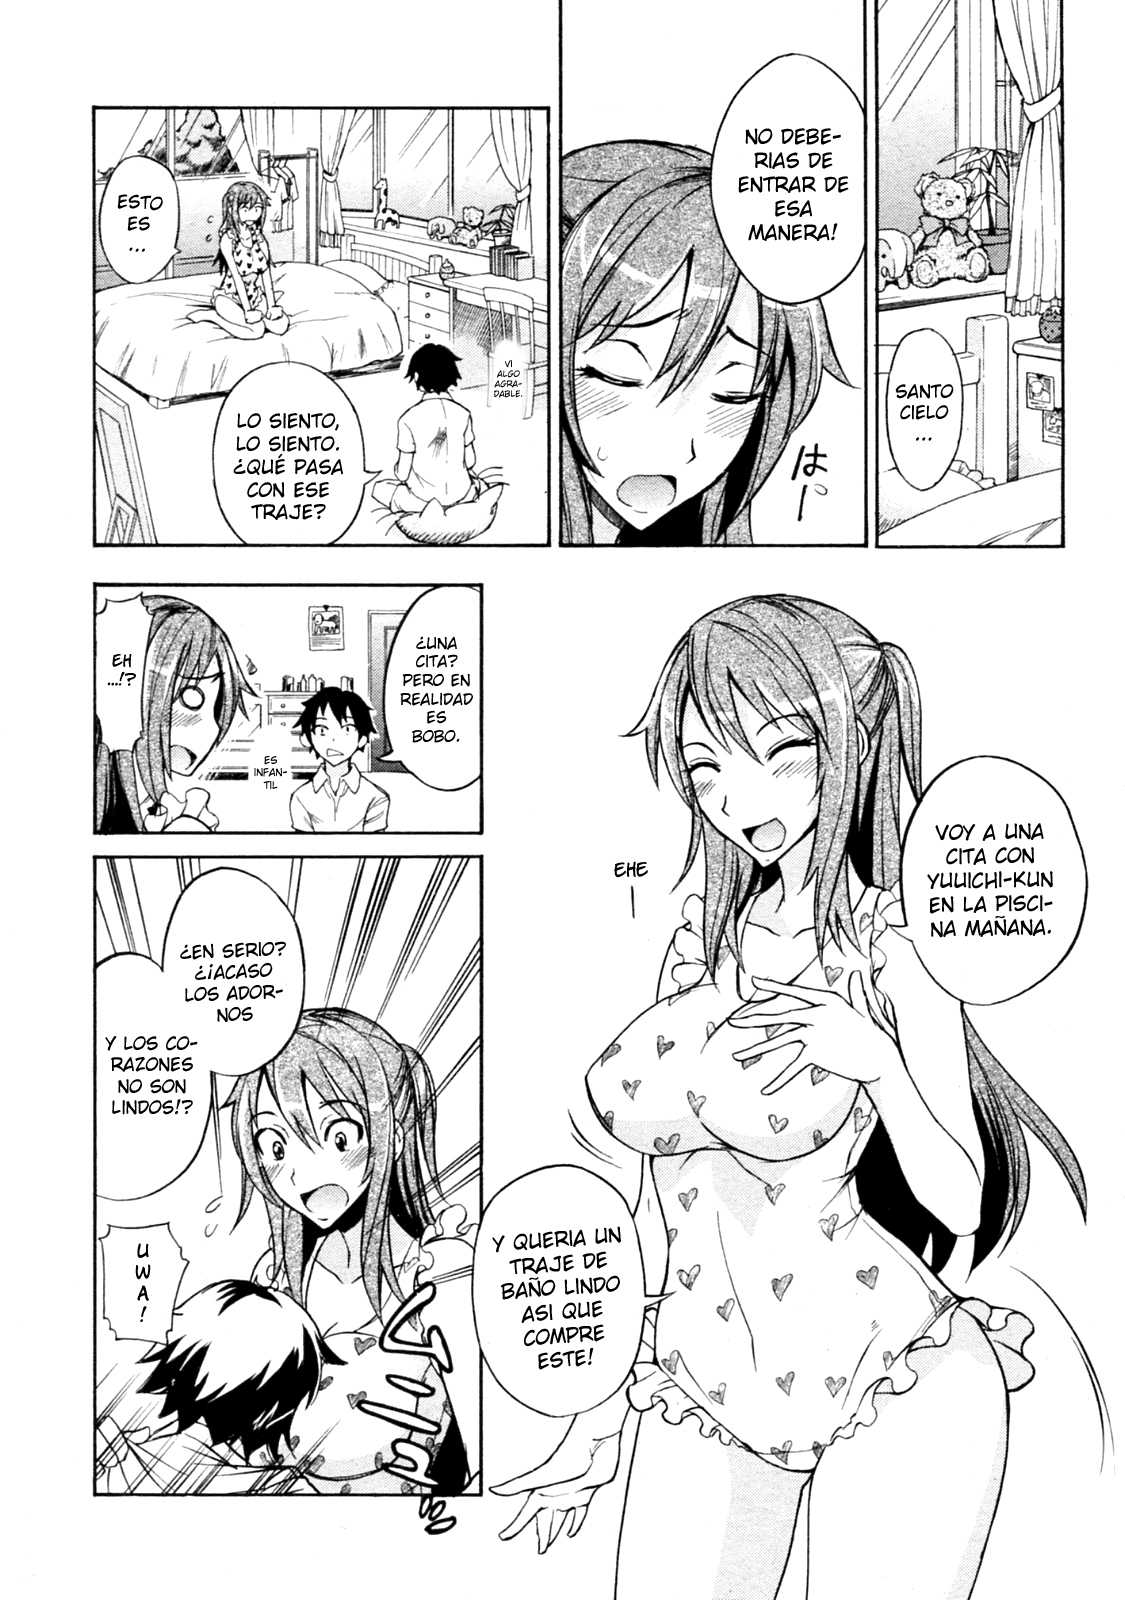 [Isao] Swimsuit and Onee-chan! [Spanish] Traducciones H-22 